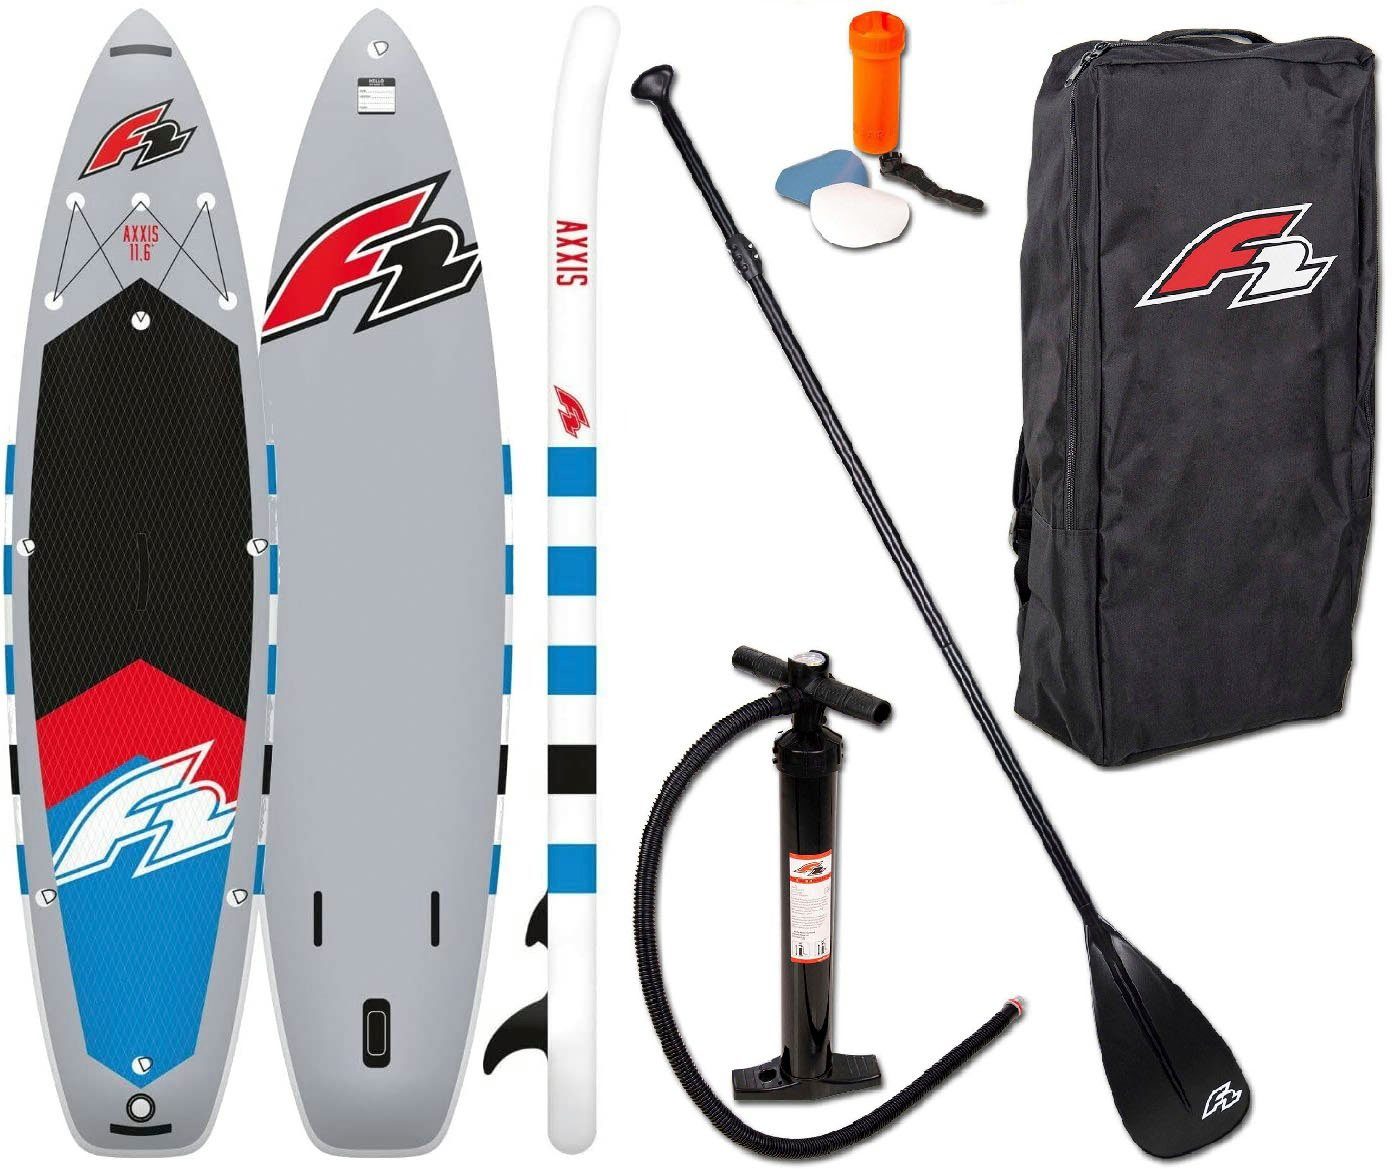 F2 Inflatable SUP-Board Axxis 11,6 grey, tlg) (Packung, 5